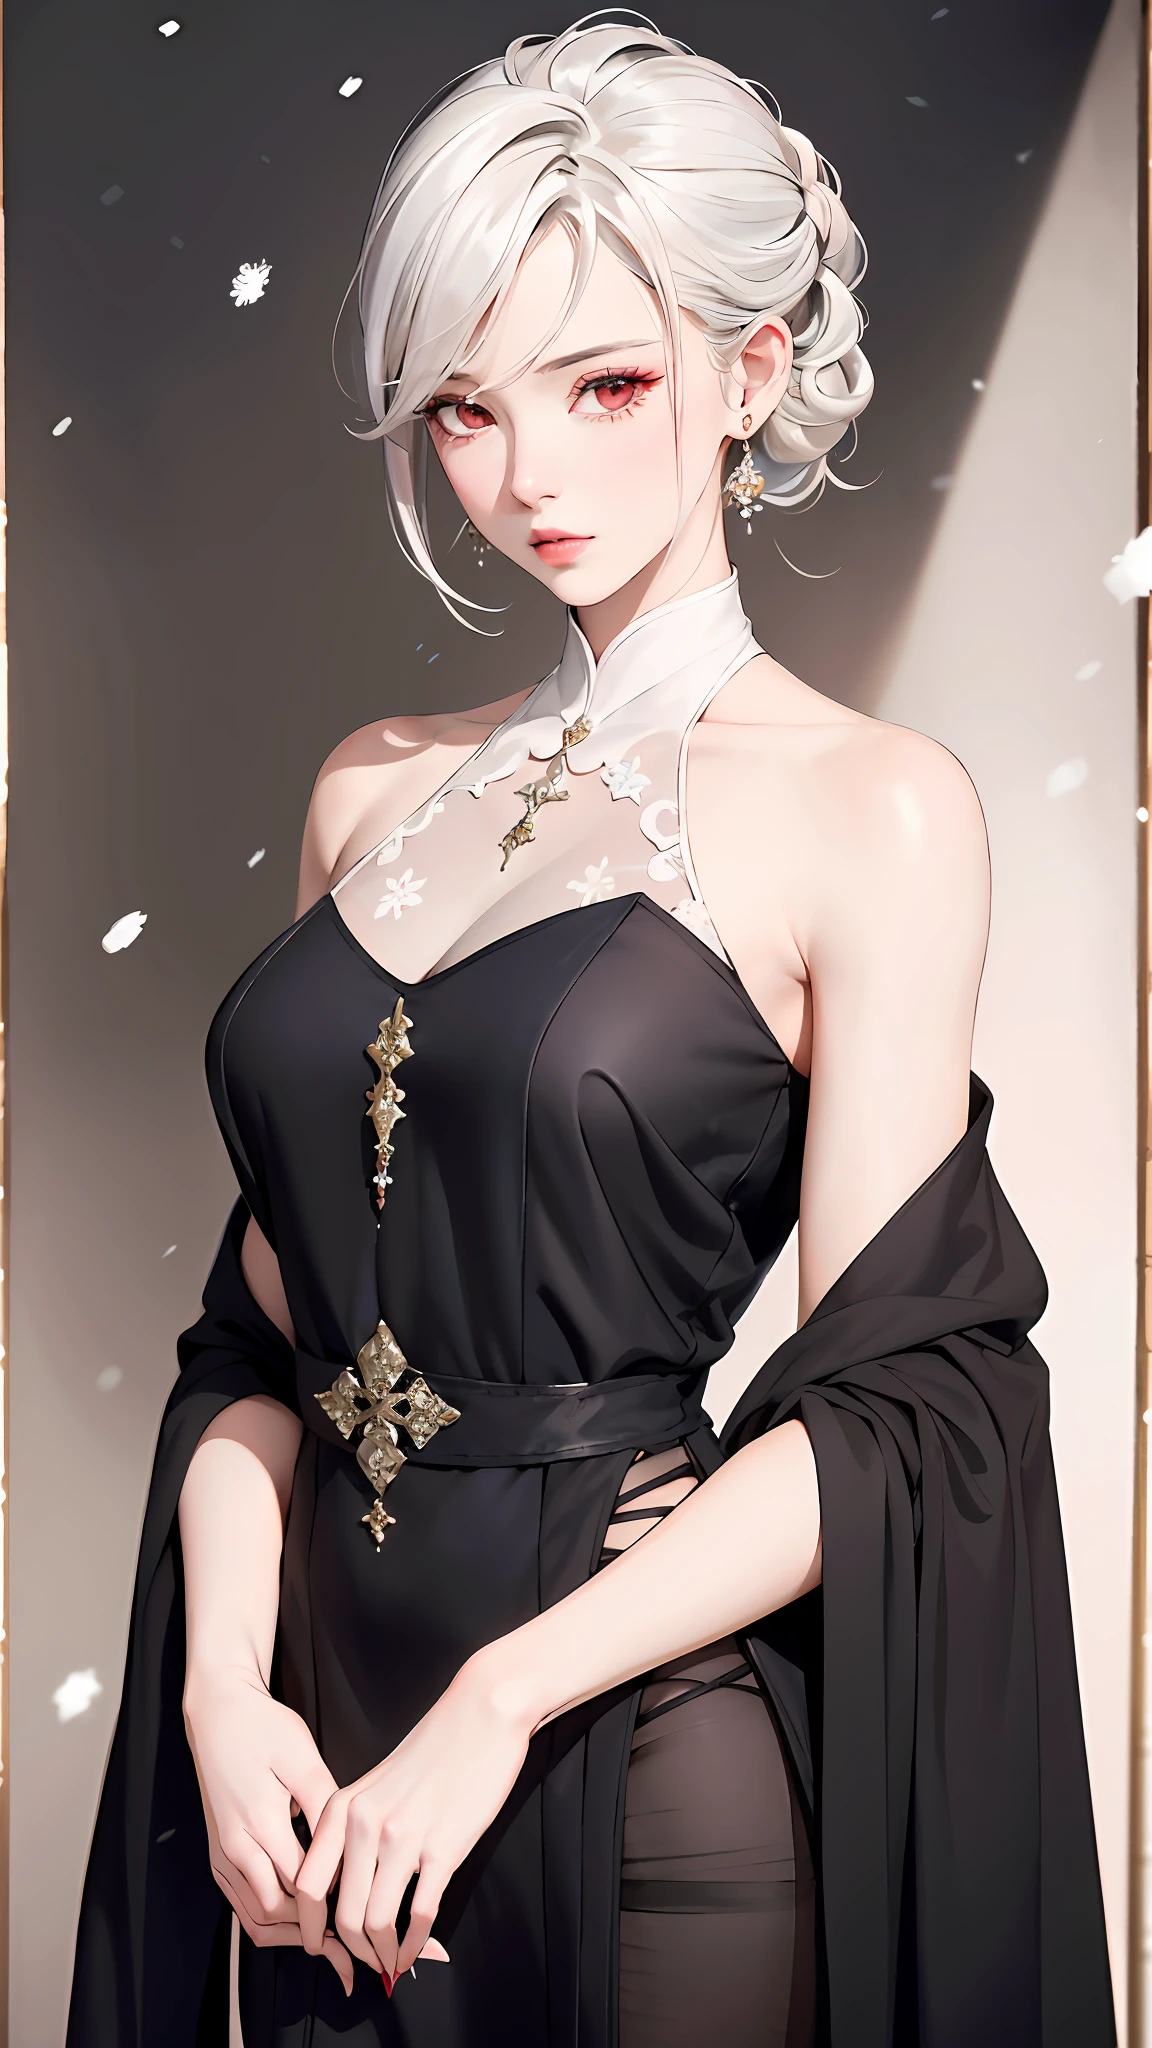 Masterpiece, Superb 1 Woman, Long Black Dress, Ink Painting, Mature Woman, Woman with Short Silver and White Hair, Hair Over Shoulder, Pale Pink Lips, Indifference, Seriousness, Bangs, Assassin, White Clothes, Facial Details, Correct Proportions, This painting was created in the Guweiz style and depicts an oil painting of a woman with short hair. The entire painting features a palette of white and black. The woman's face is very realistic female faces, which are loved by the audience. Presented in a meticulous drawing style. The women's white hair is like snow, the eyes seem to be full of watery red eyes, exuding a mysterious atmosphere, the women are dressed in elegant and exquisite clothing, and the whole painting shows a high degree of skill.